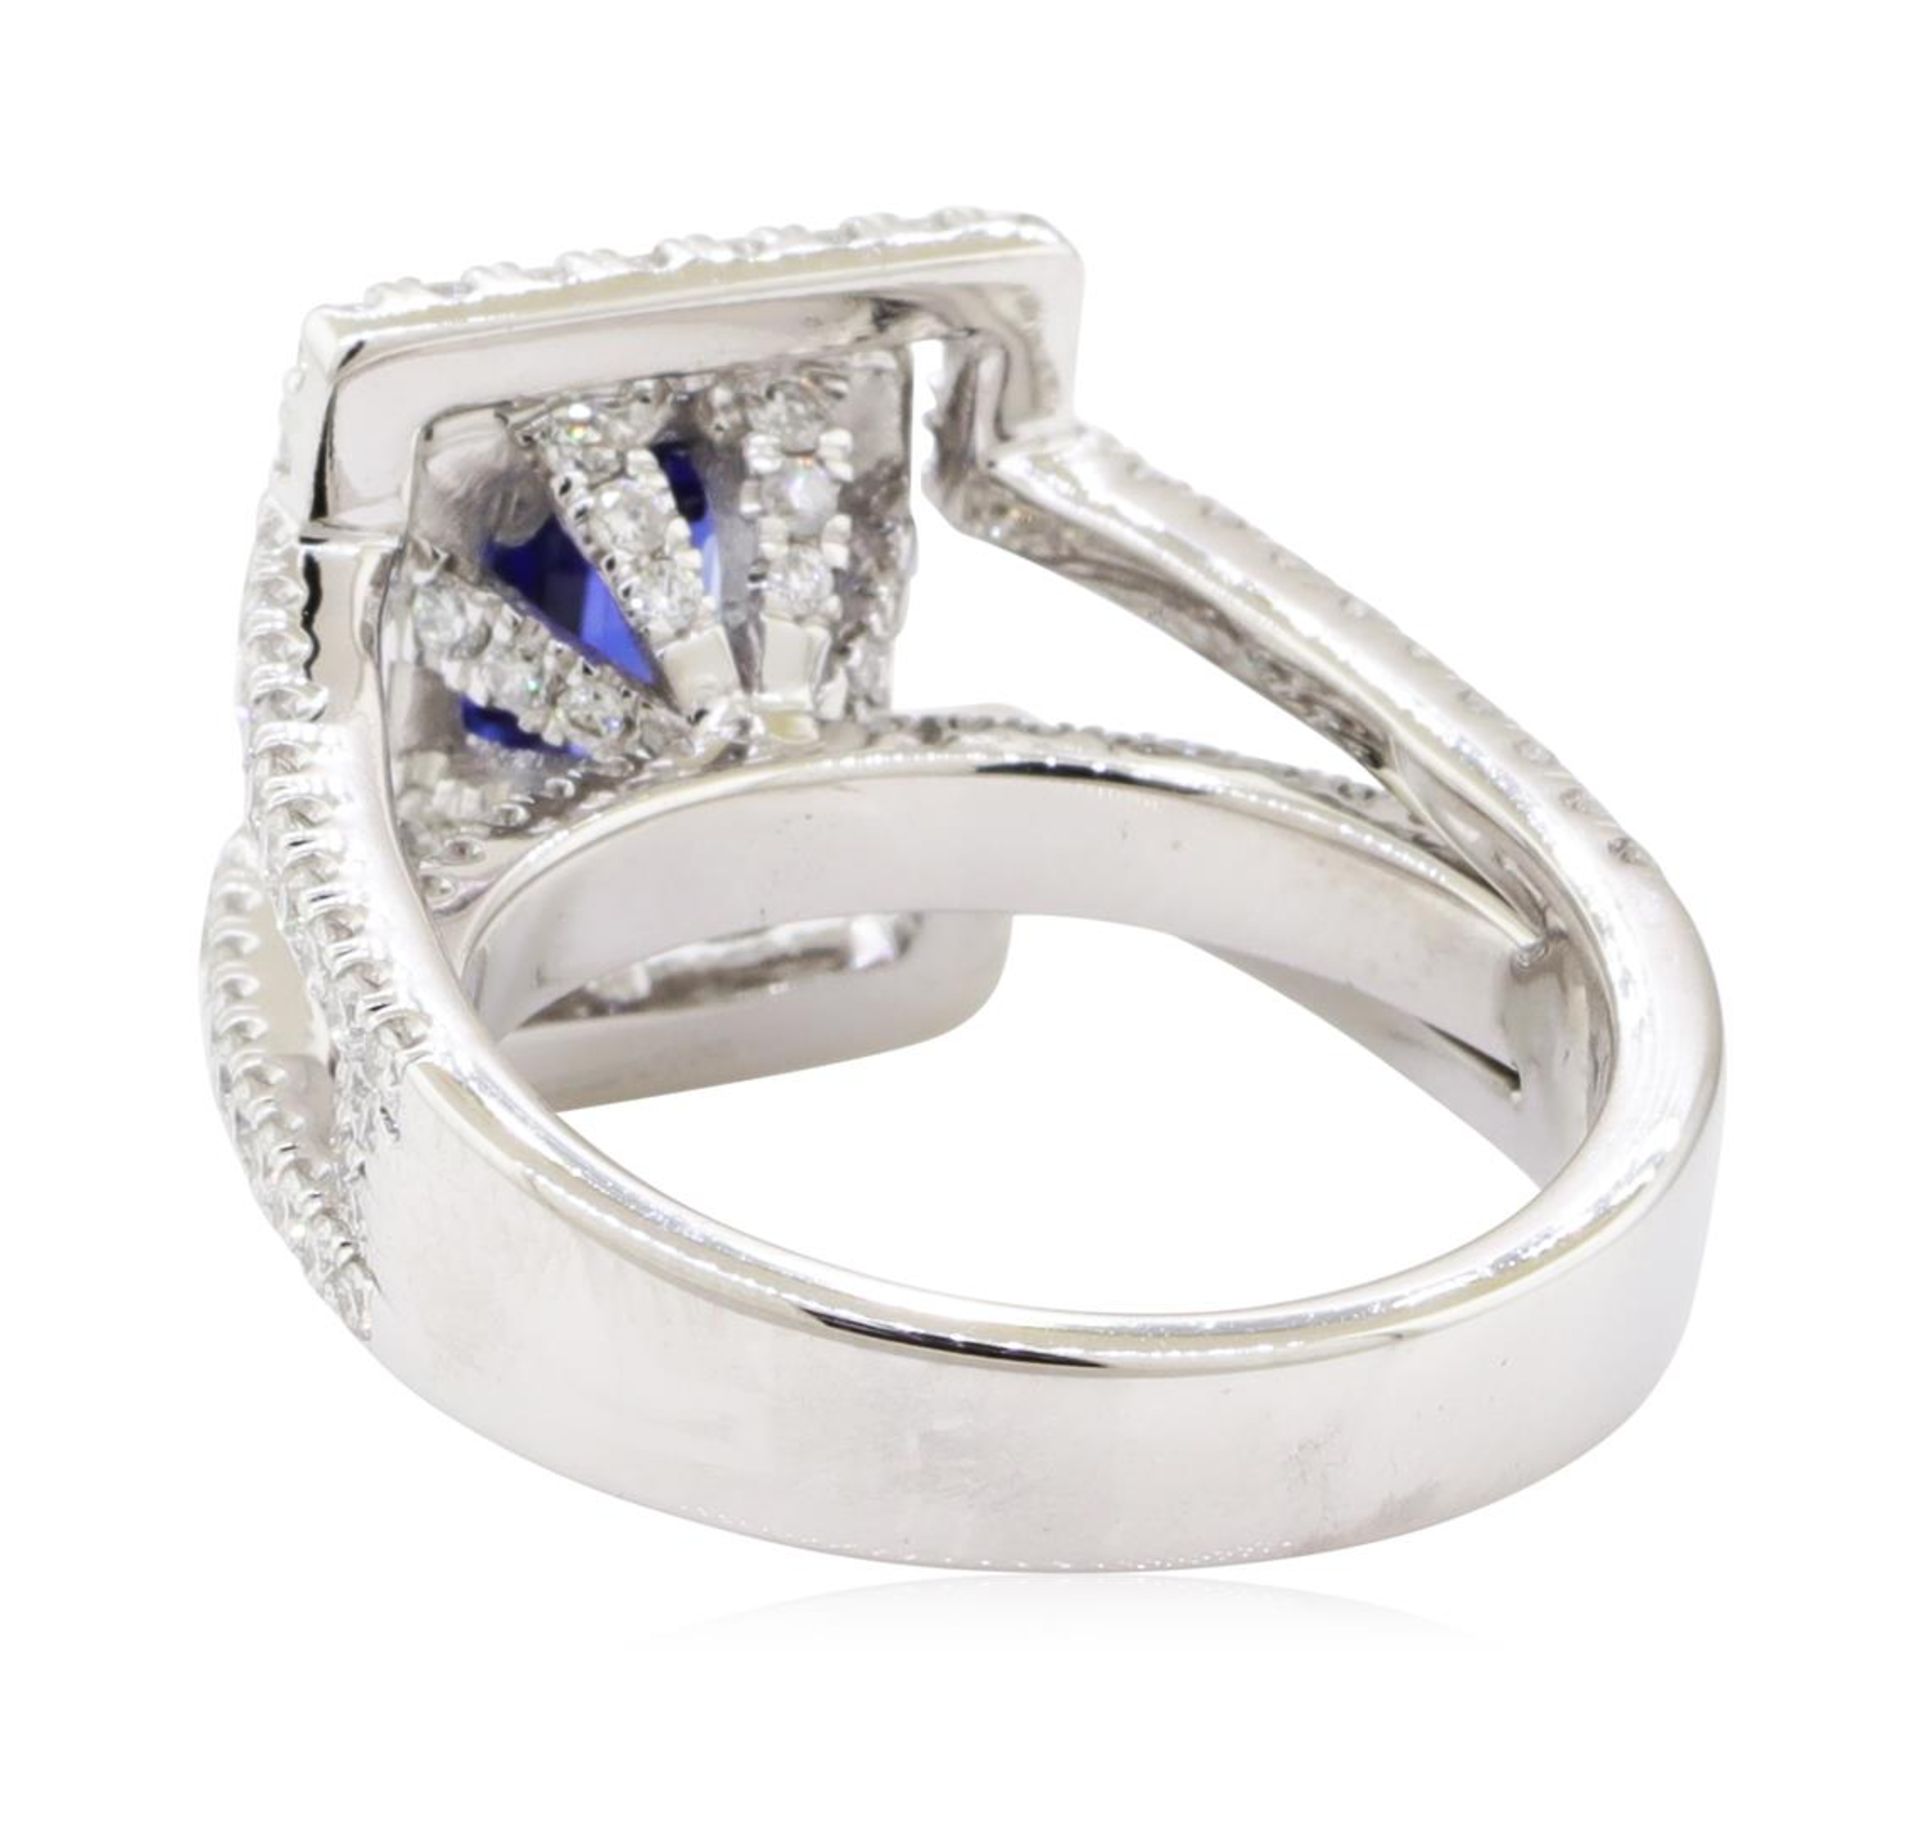 2.40 ctw Sapphire and Diamond Ring - 14KT White Gold - Image 3 of 5